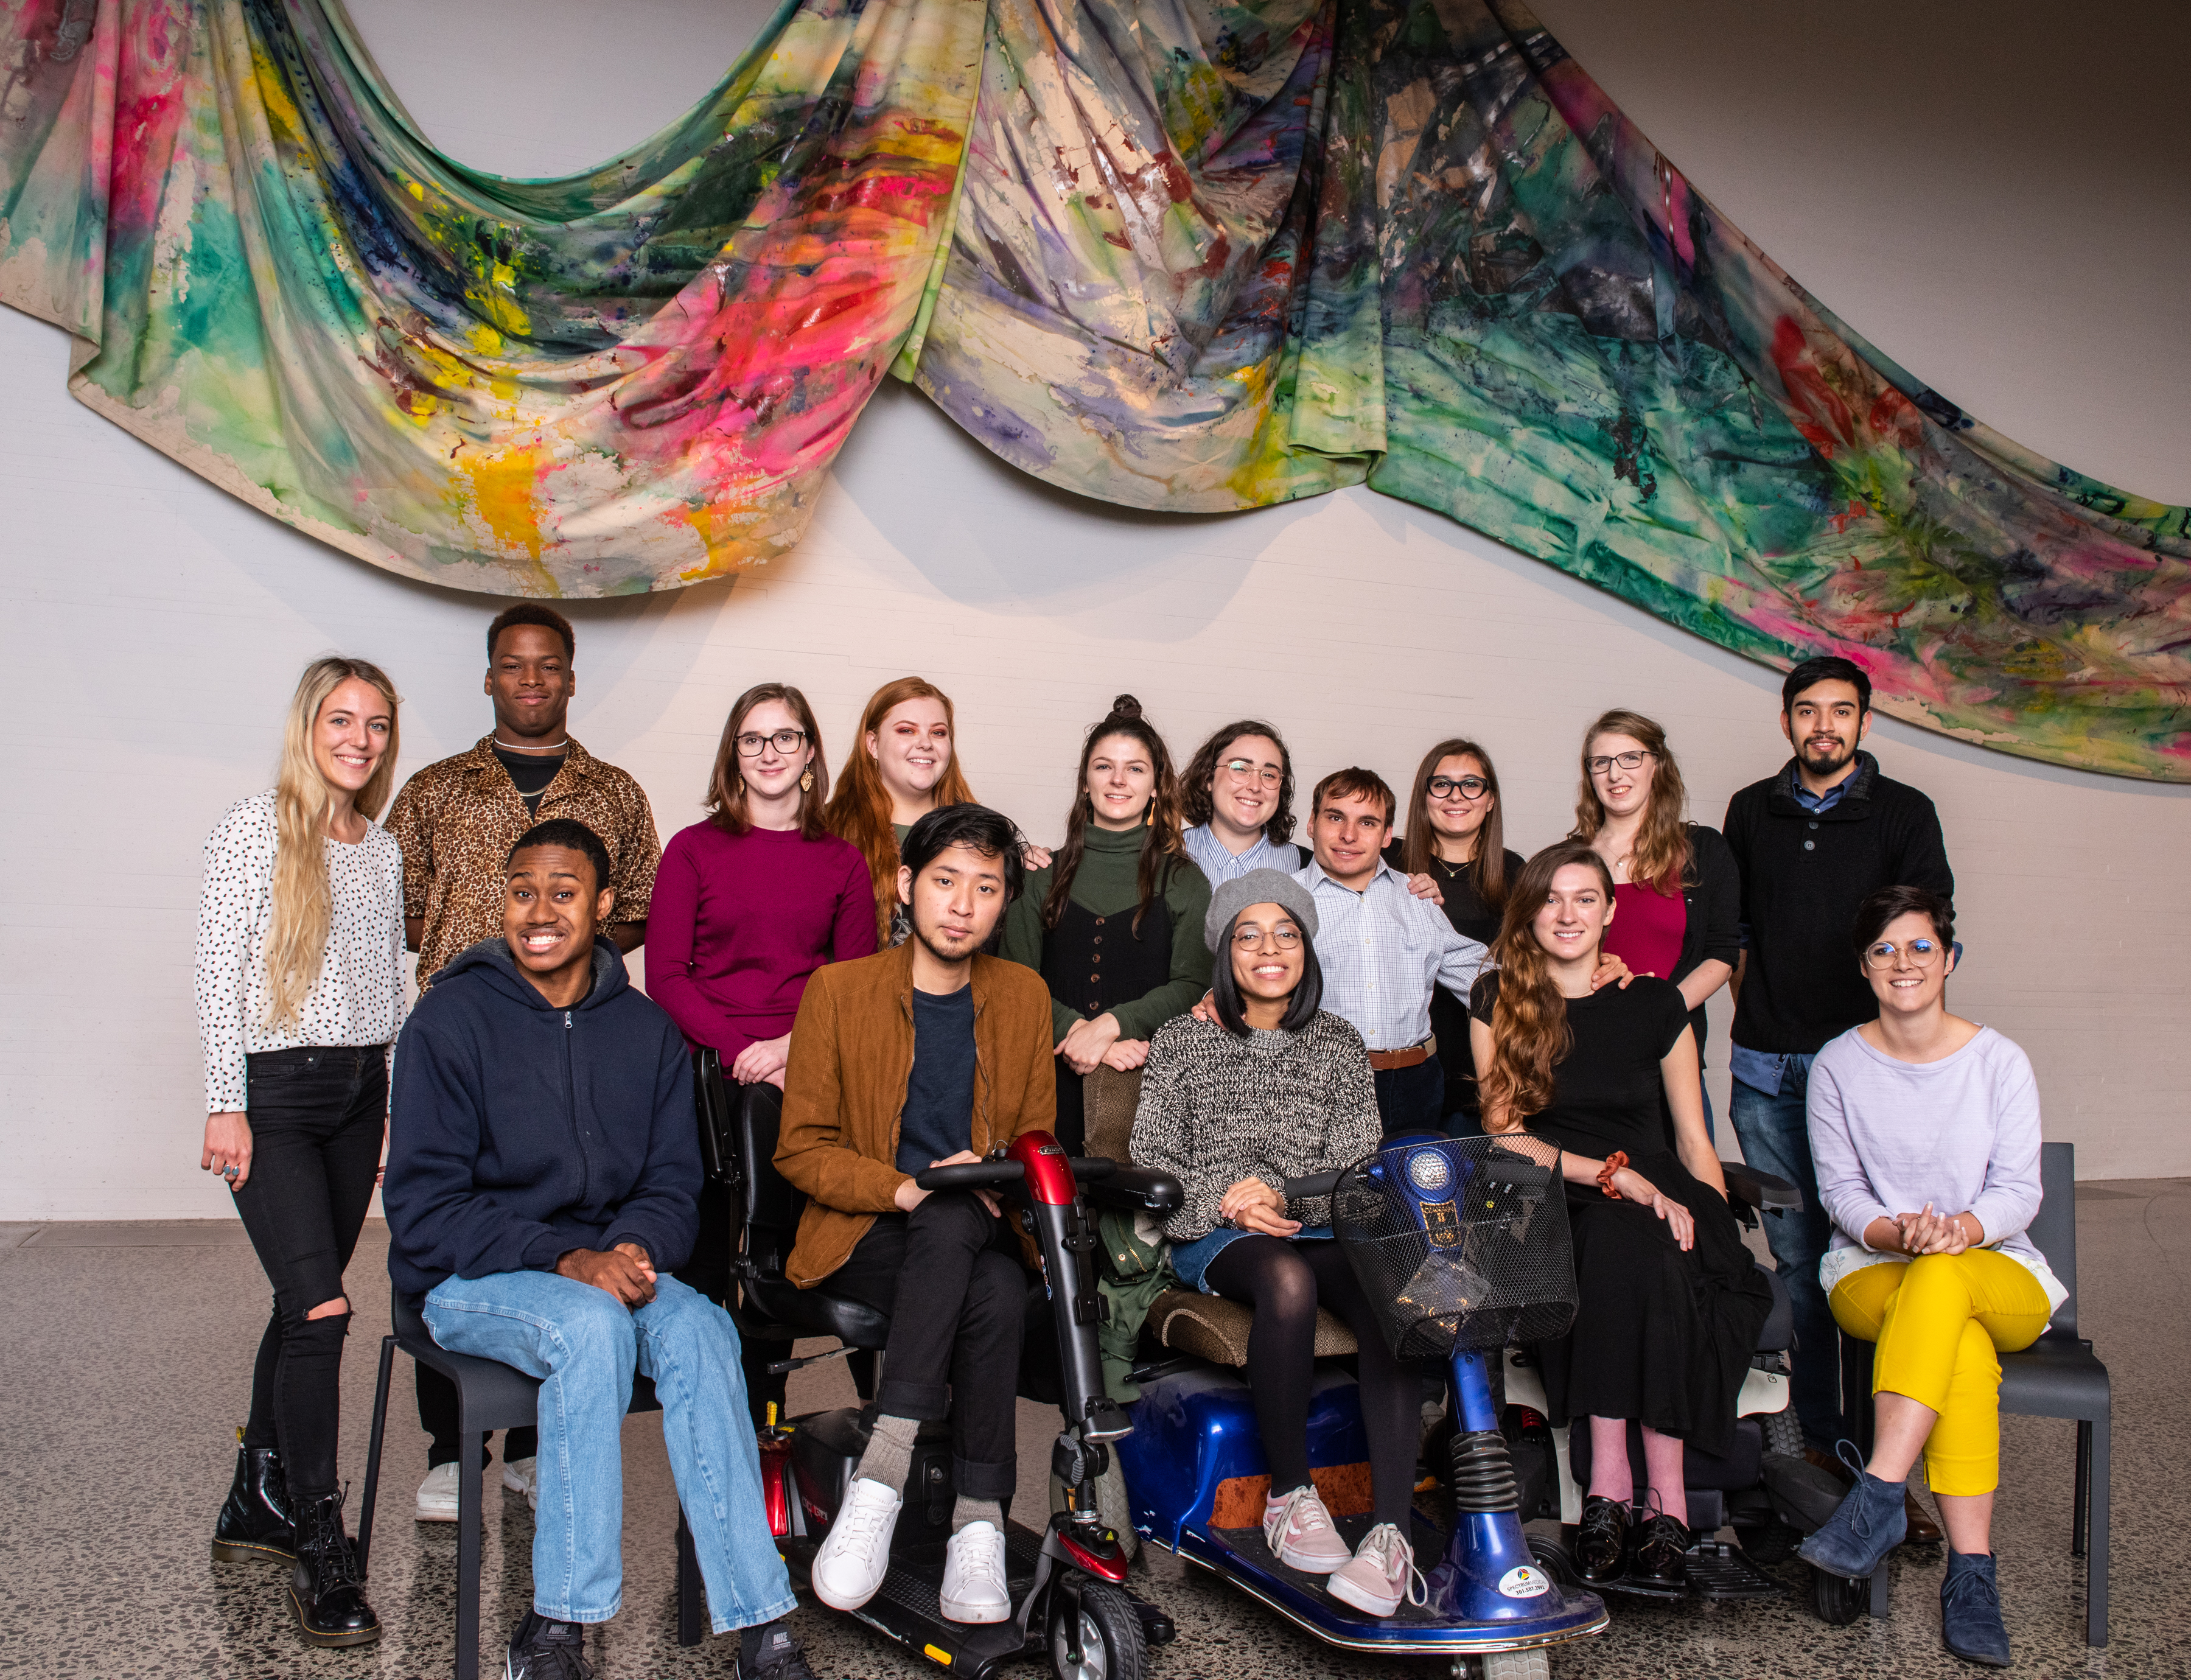 A photo of the 15 winners of the 2019-2020 Emerging Young Artists Program, posed in two rows, the front row seated, under a multicolored swirling horizontal sculpture